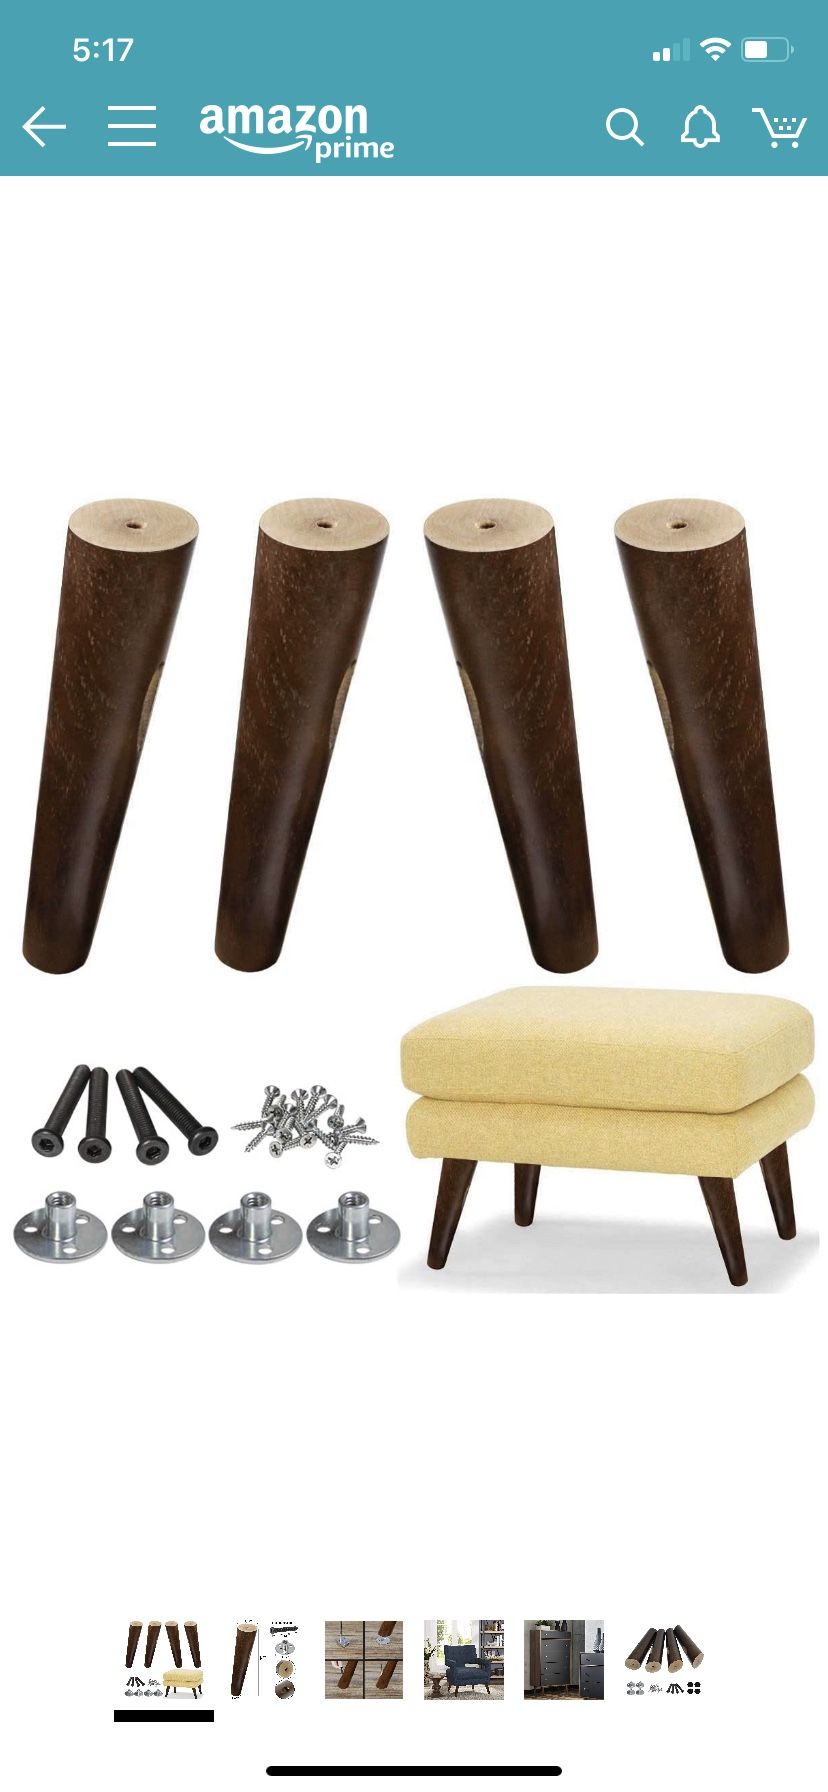 AORYVIC wood sofa legs 8 inch, 2 sets of 4 available NEW